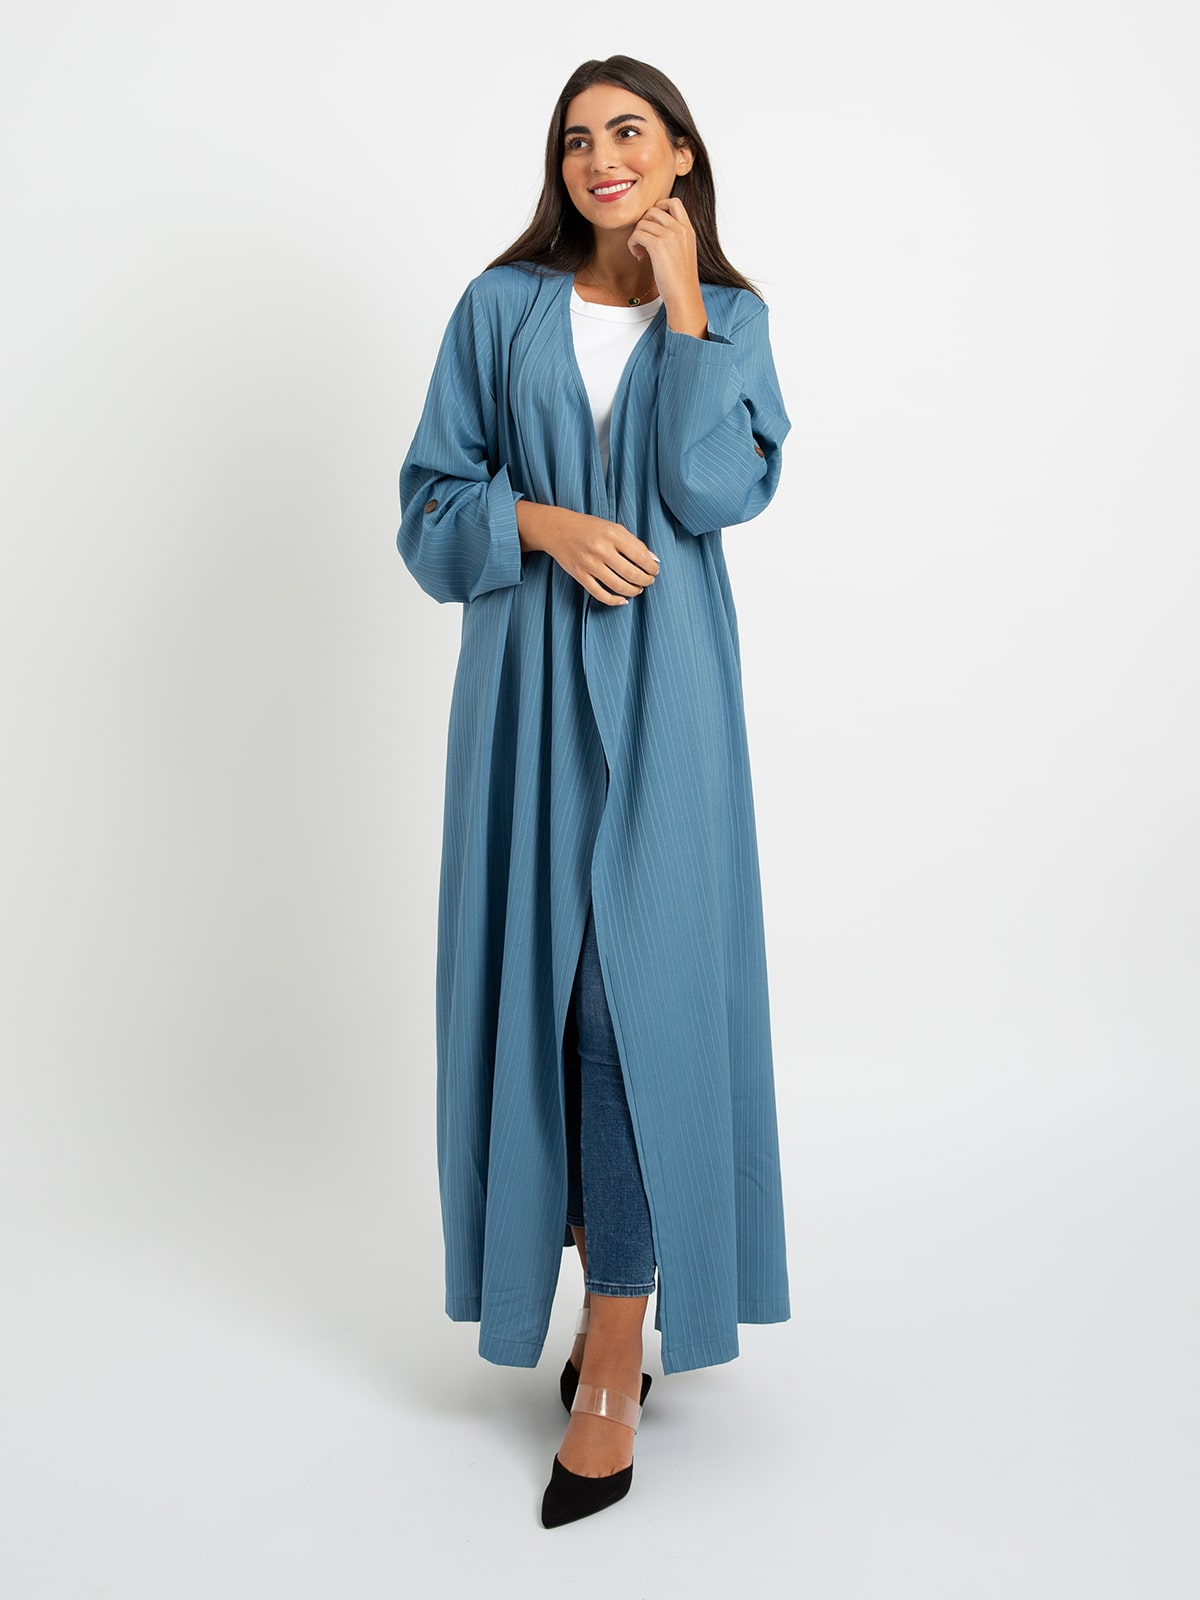 Kaafmeem women clothing regular fit sky comfy long abaya for everyday in wrinkle free fabric for work or outings